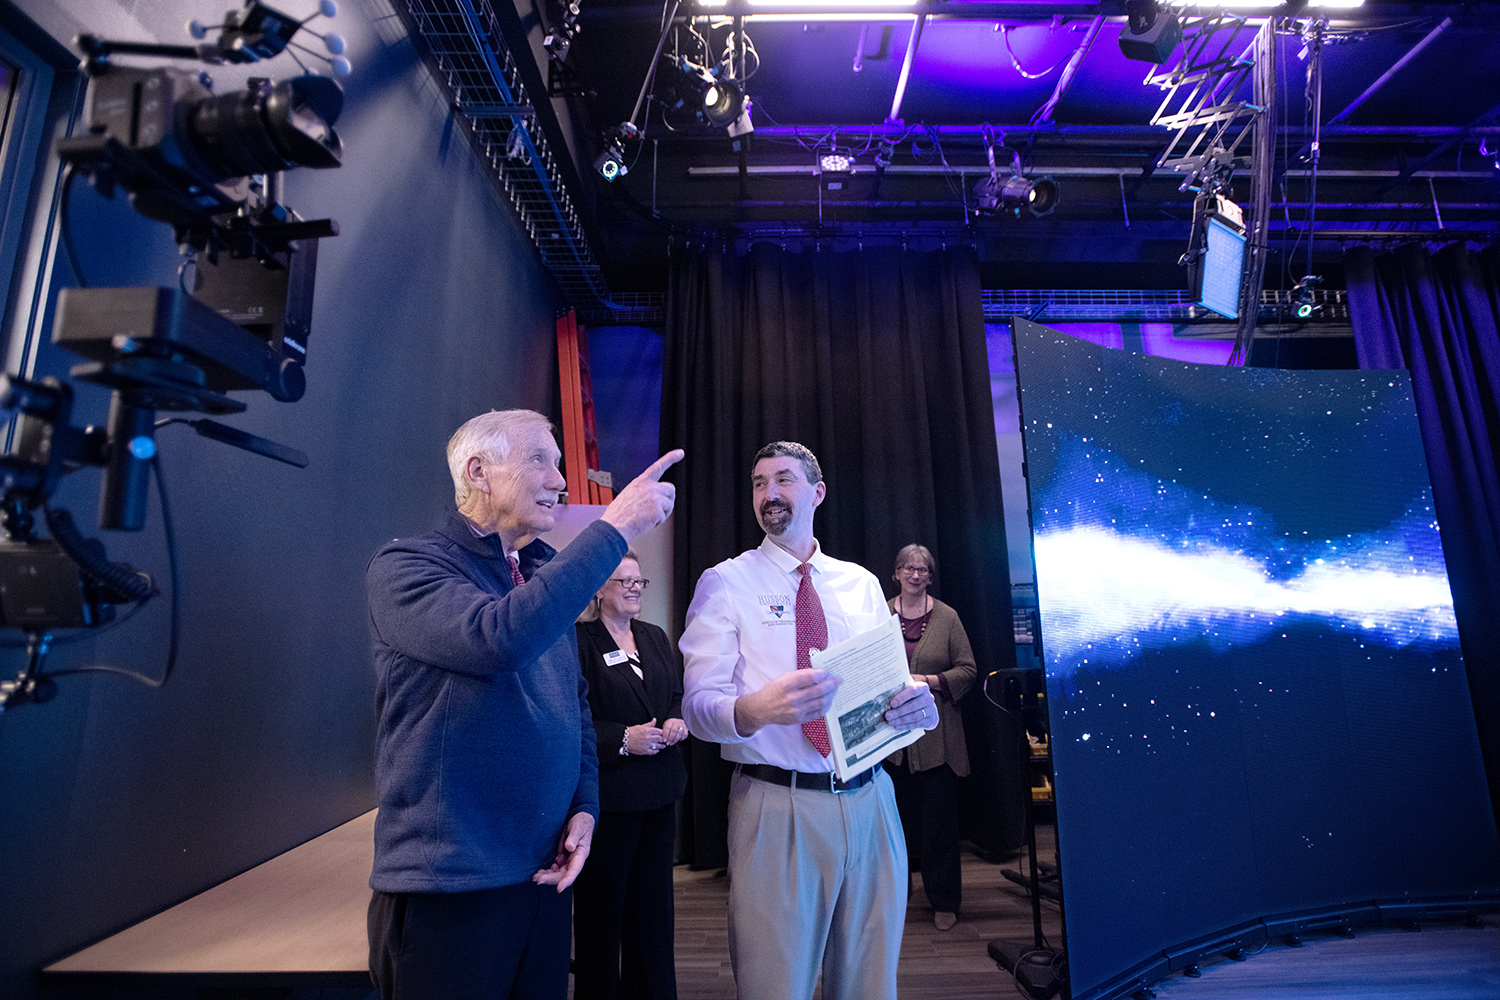 Senator Angus King is shown in a technology lab with screens where he is being spoken to by another man.